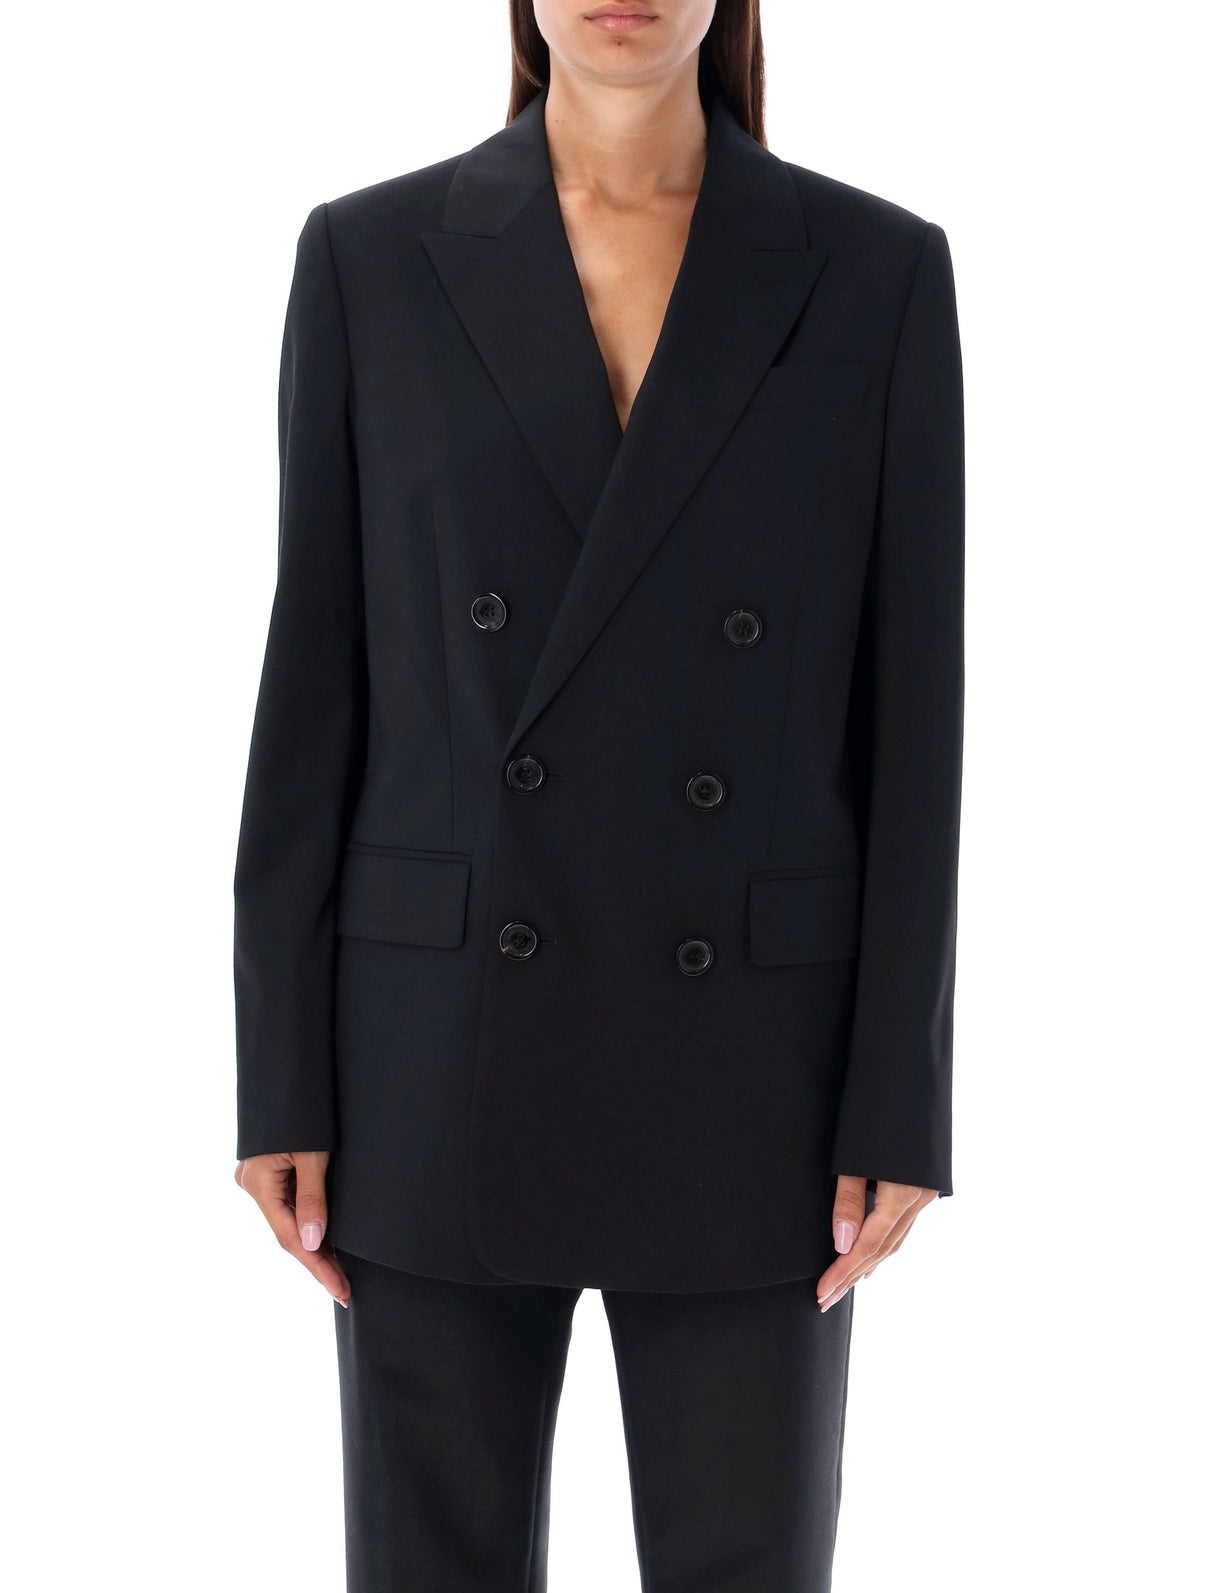 DSQUARED2 Double Breasted Blazer in New York Style with Printed Lining for Women